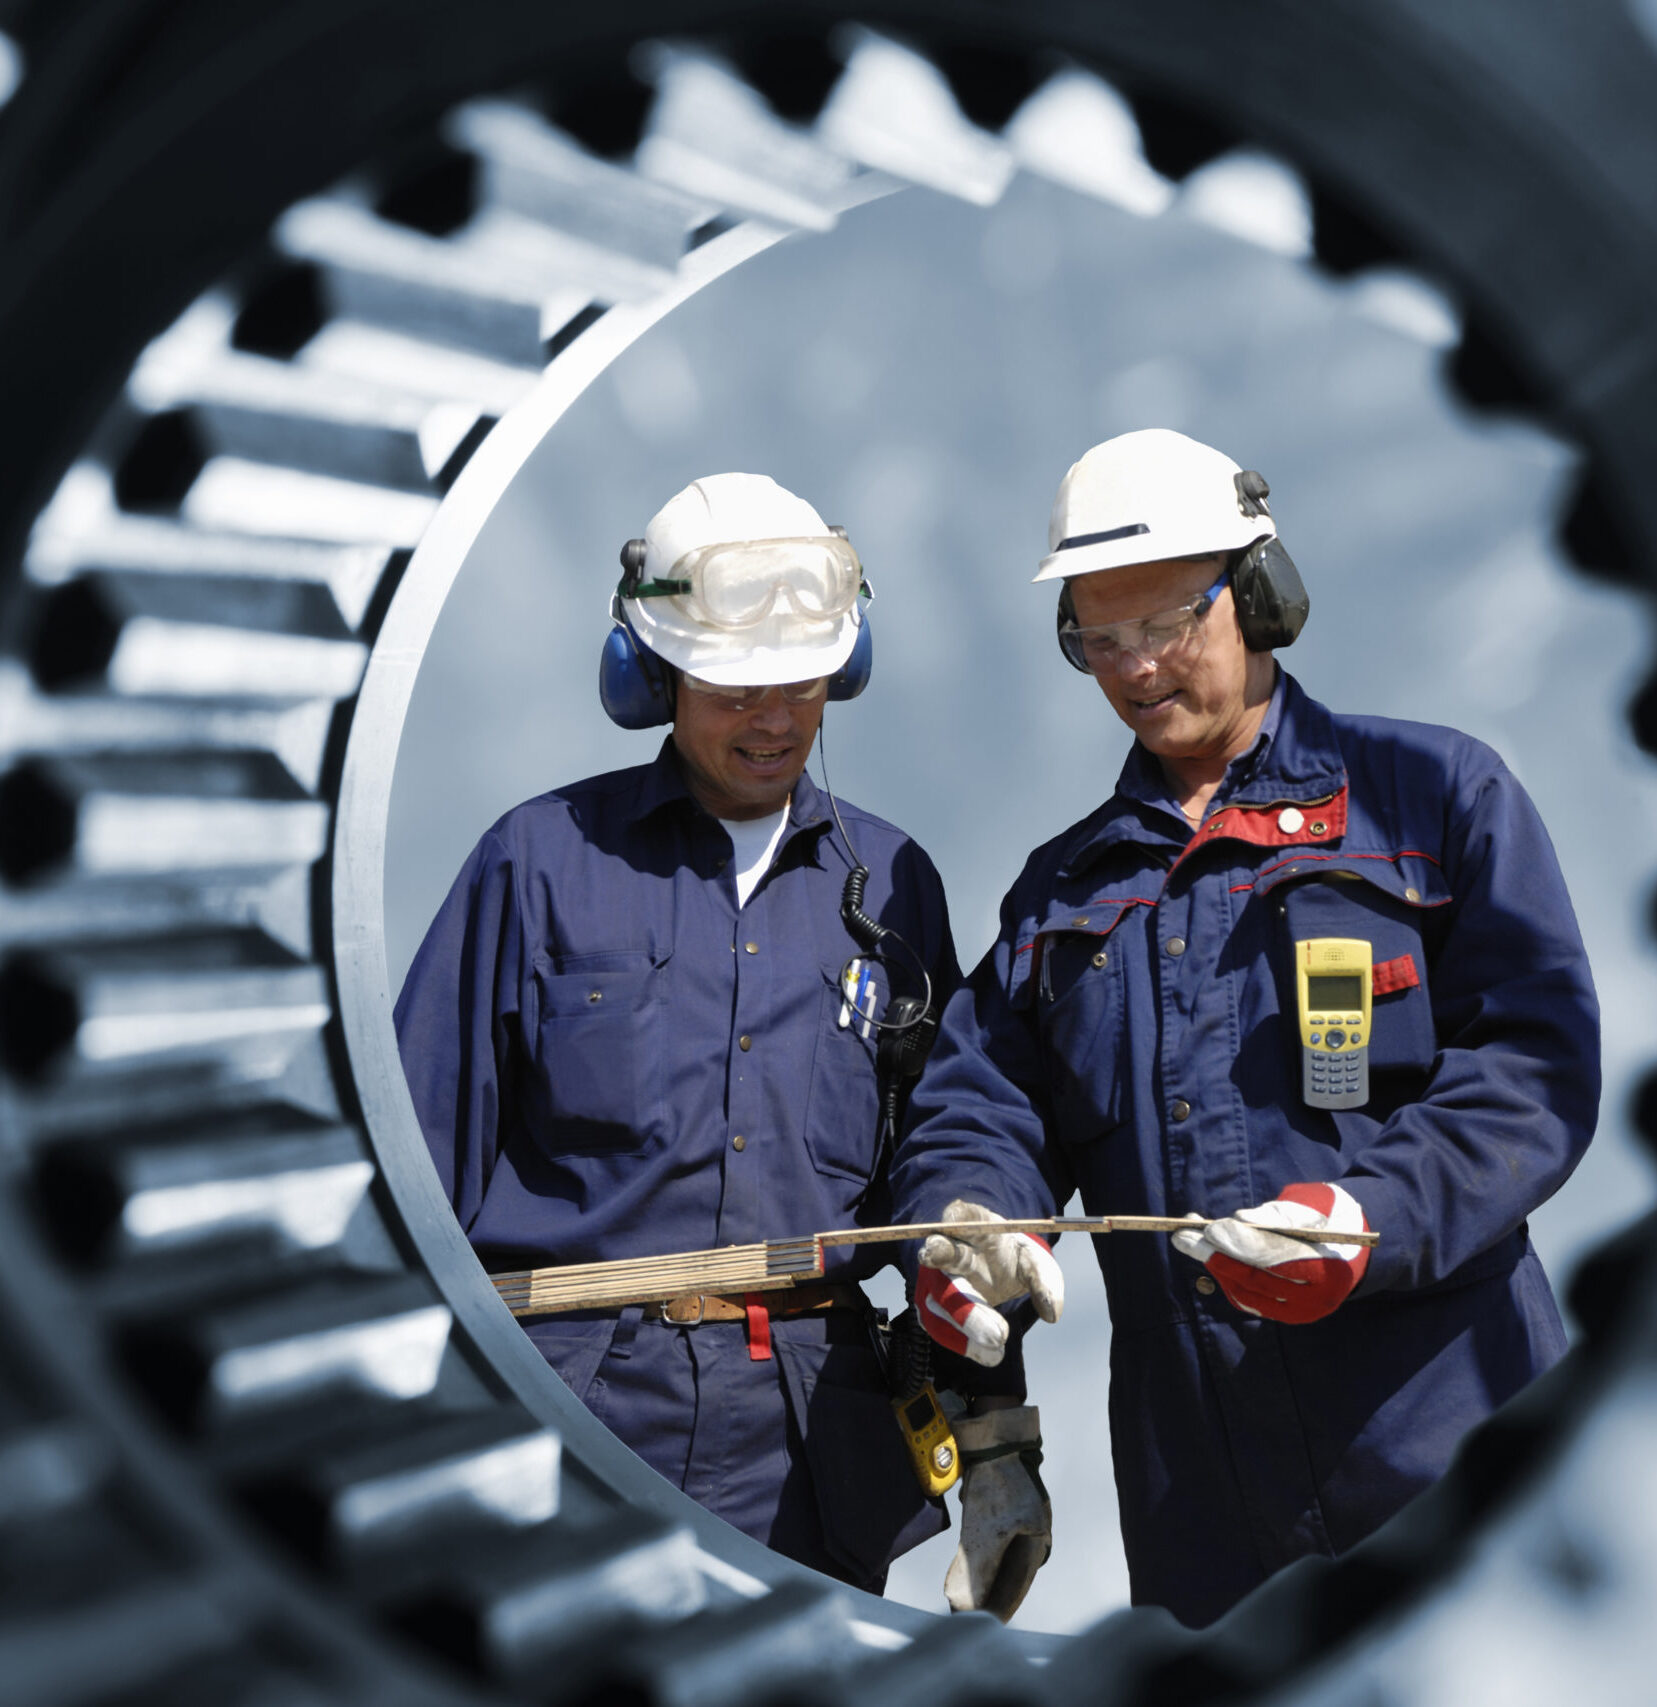 Two men in jumpsuits and hardhats seen through aperture